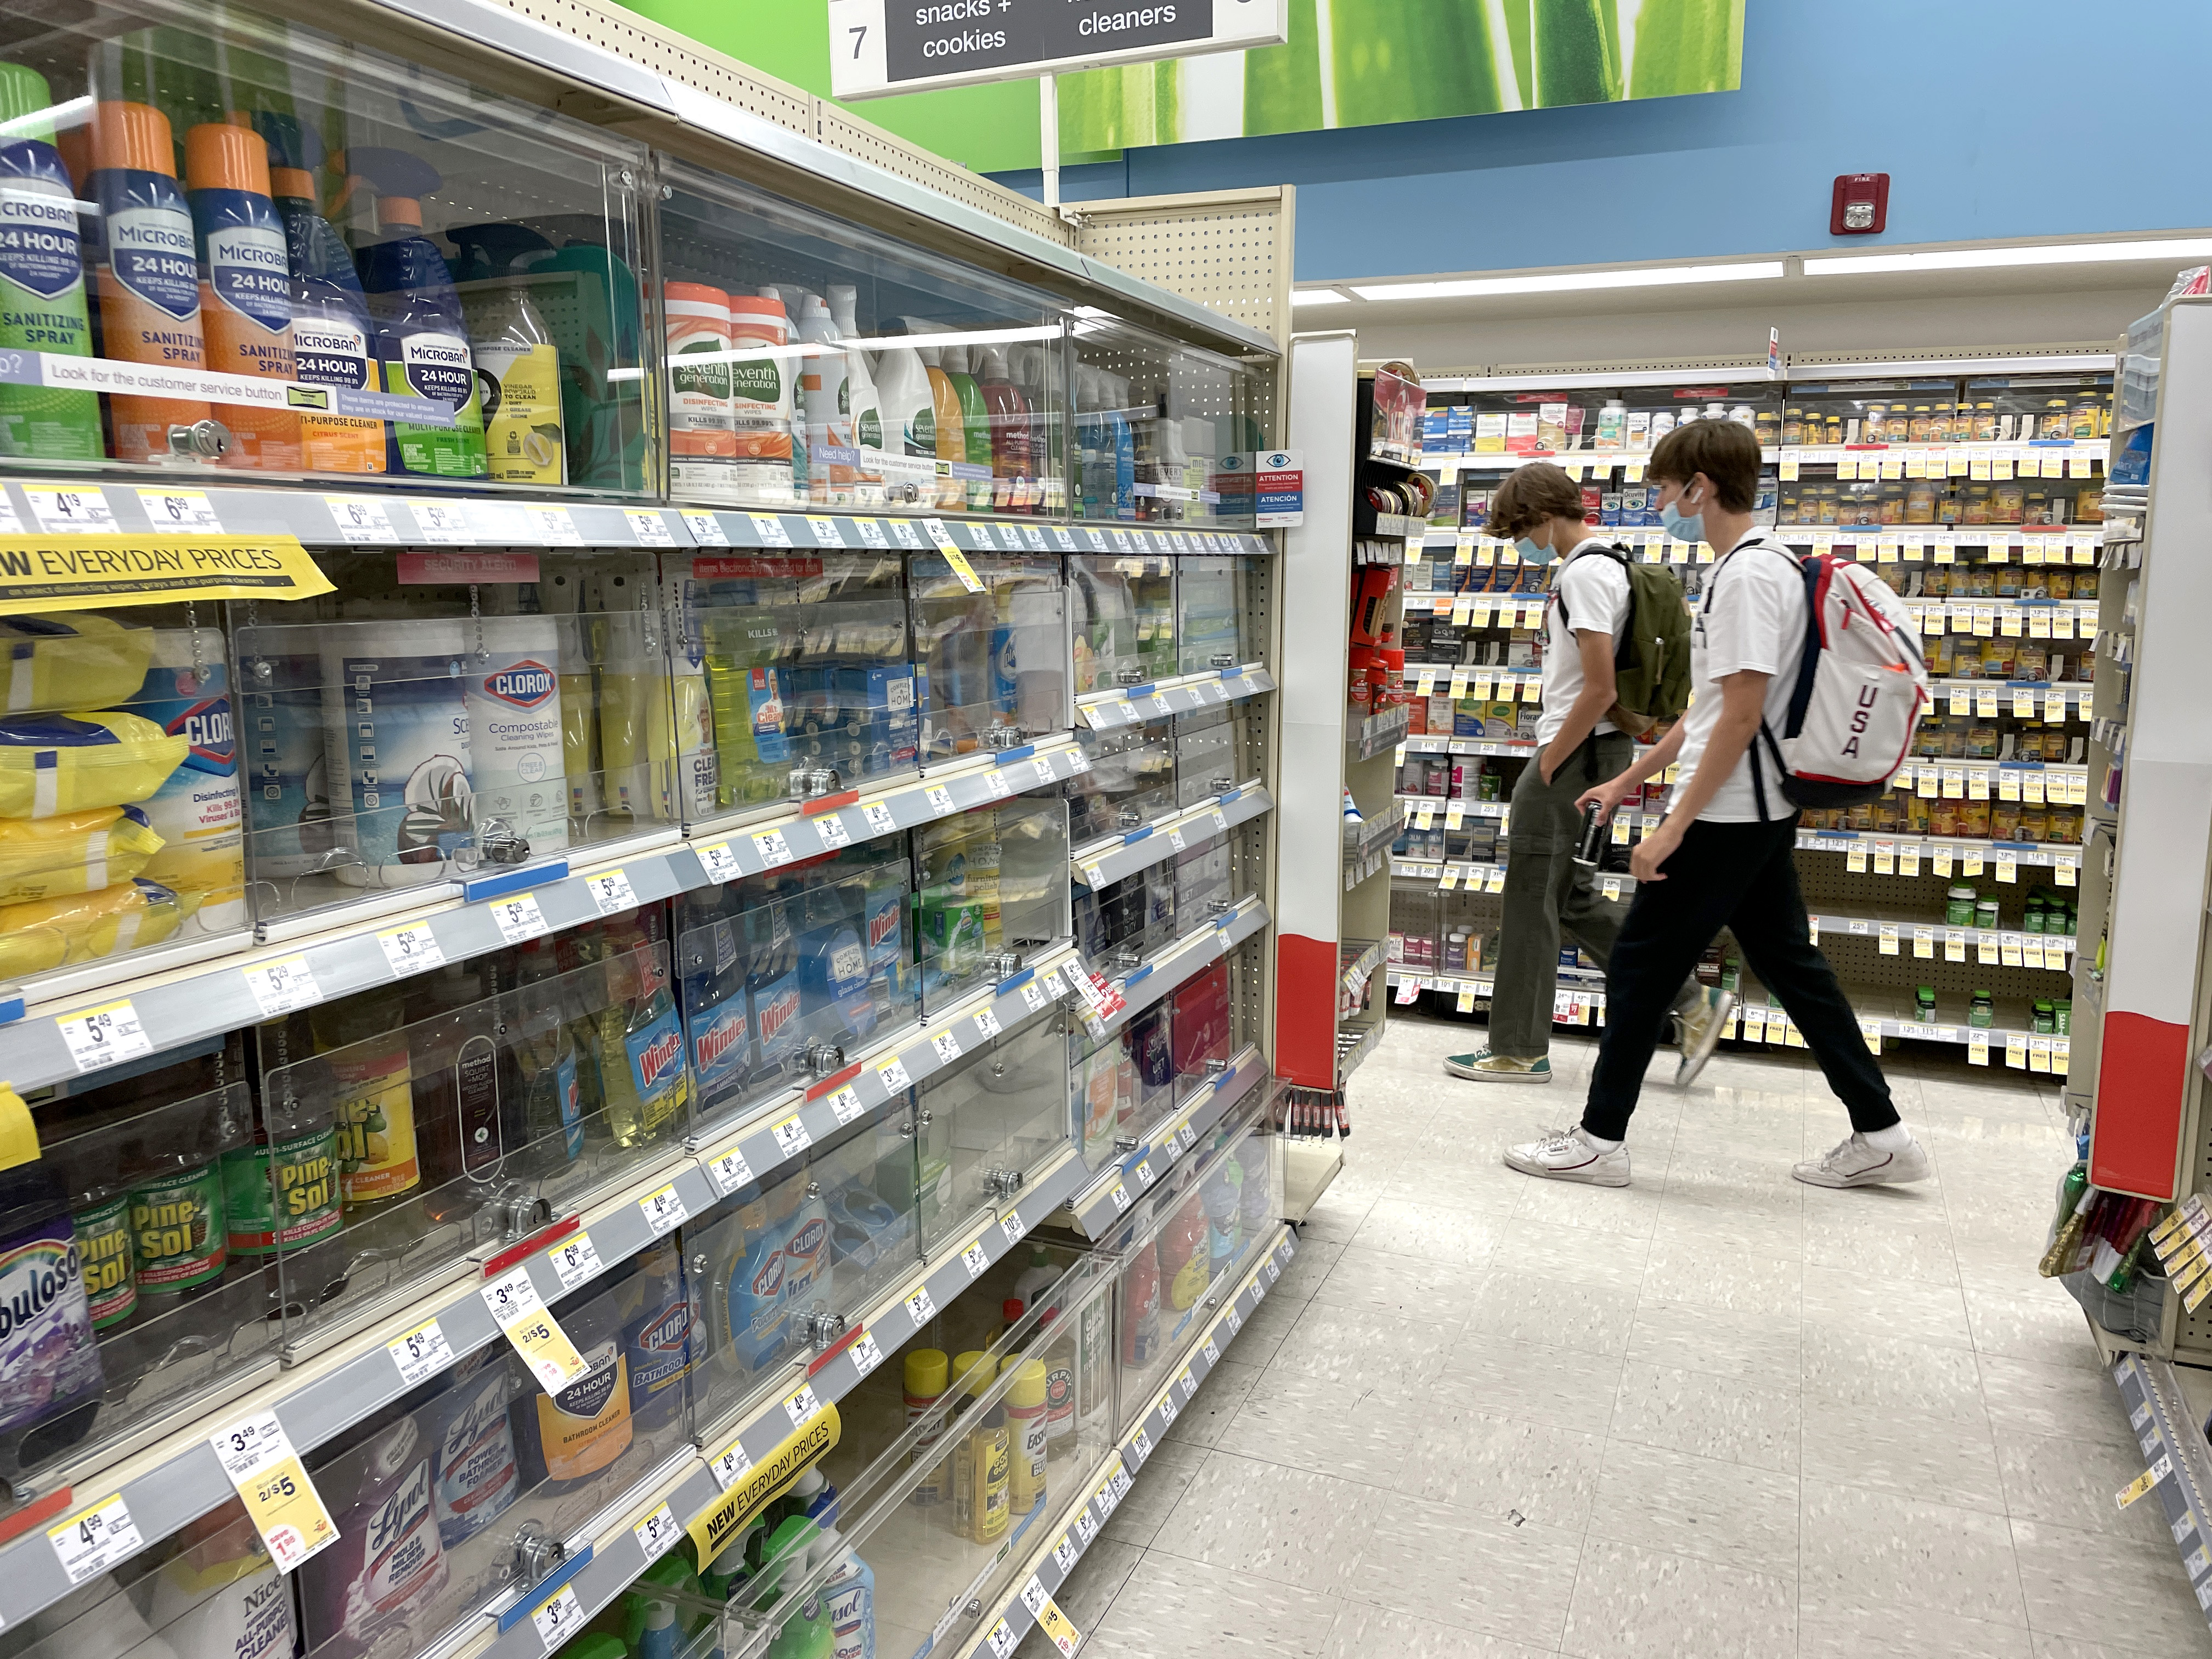 CVS, Walgreens Lock up Items to Prevent Theft, but Customers Annoyed